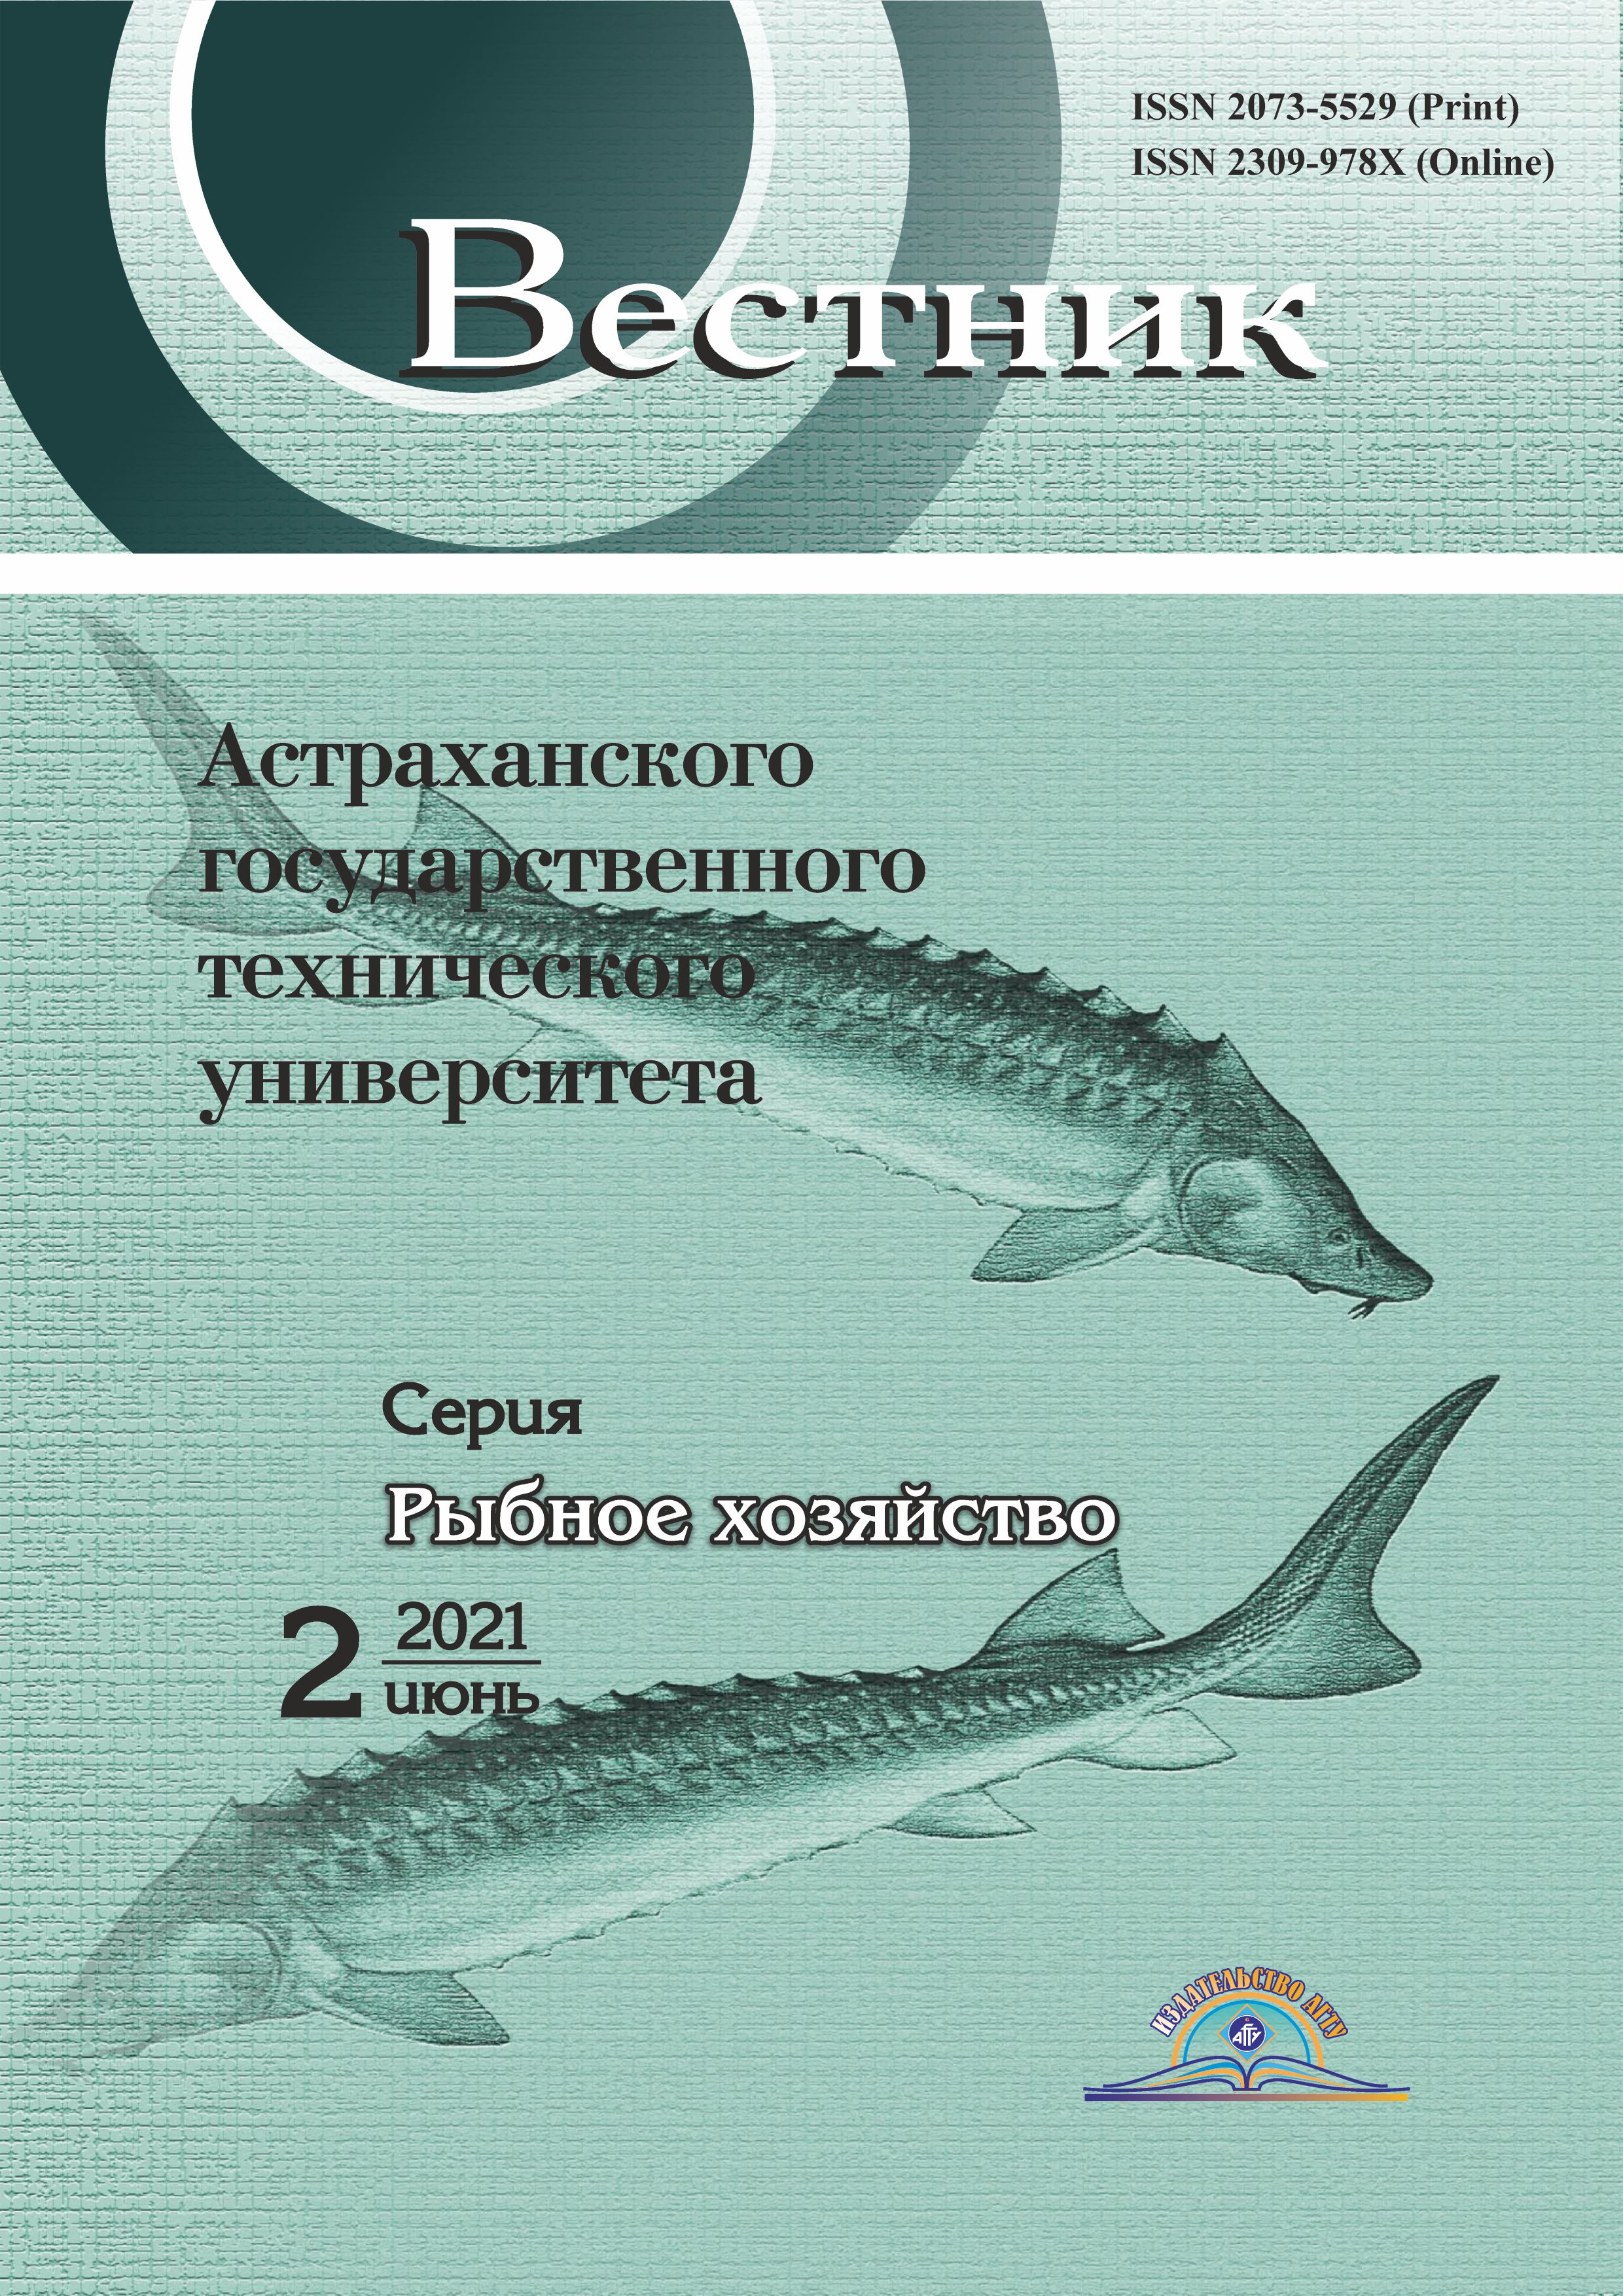                         PHYSIOLOGICAL AND BIOCHEMICAL CHANGES  IN CASPIAN SPRAT  (CLUPEONELLA DELICATULA CASPIA SVETOVIDOV)  DURING DIFFERENT PERIODS OF ANNUAL CYCLE
            